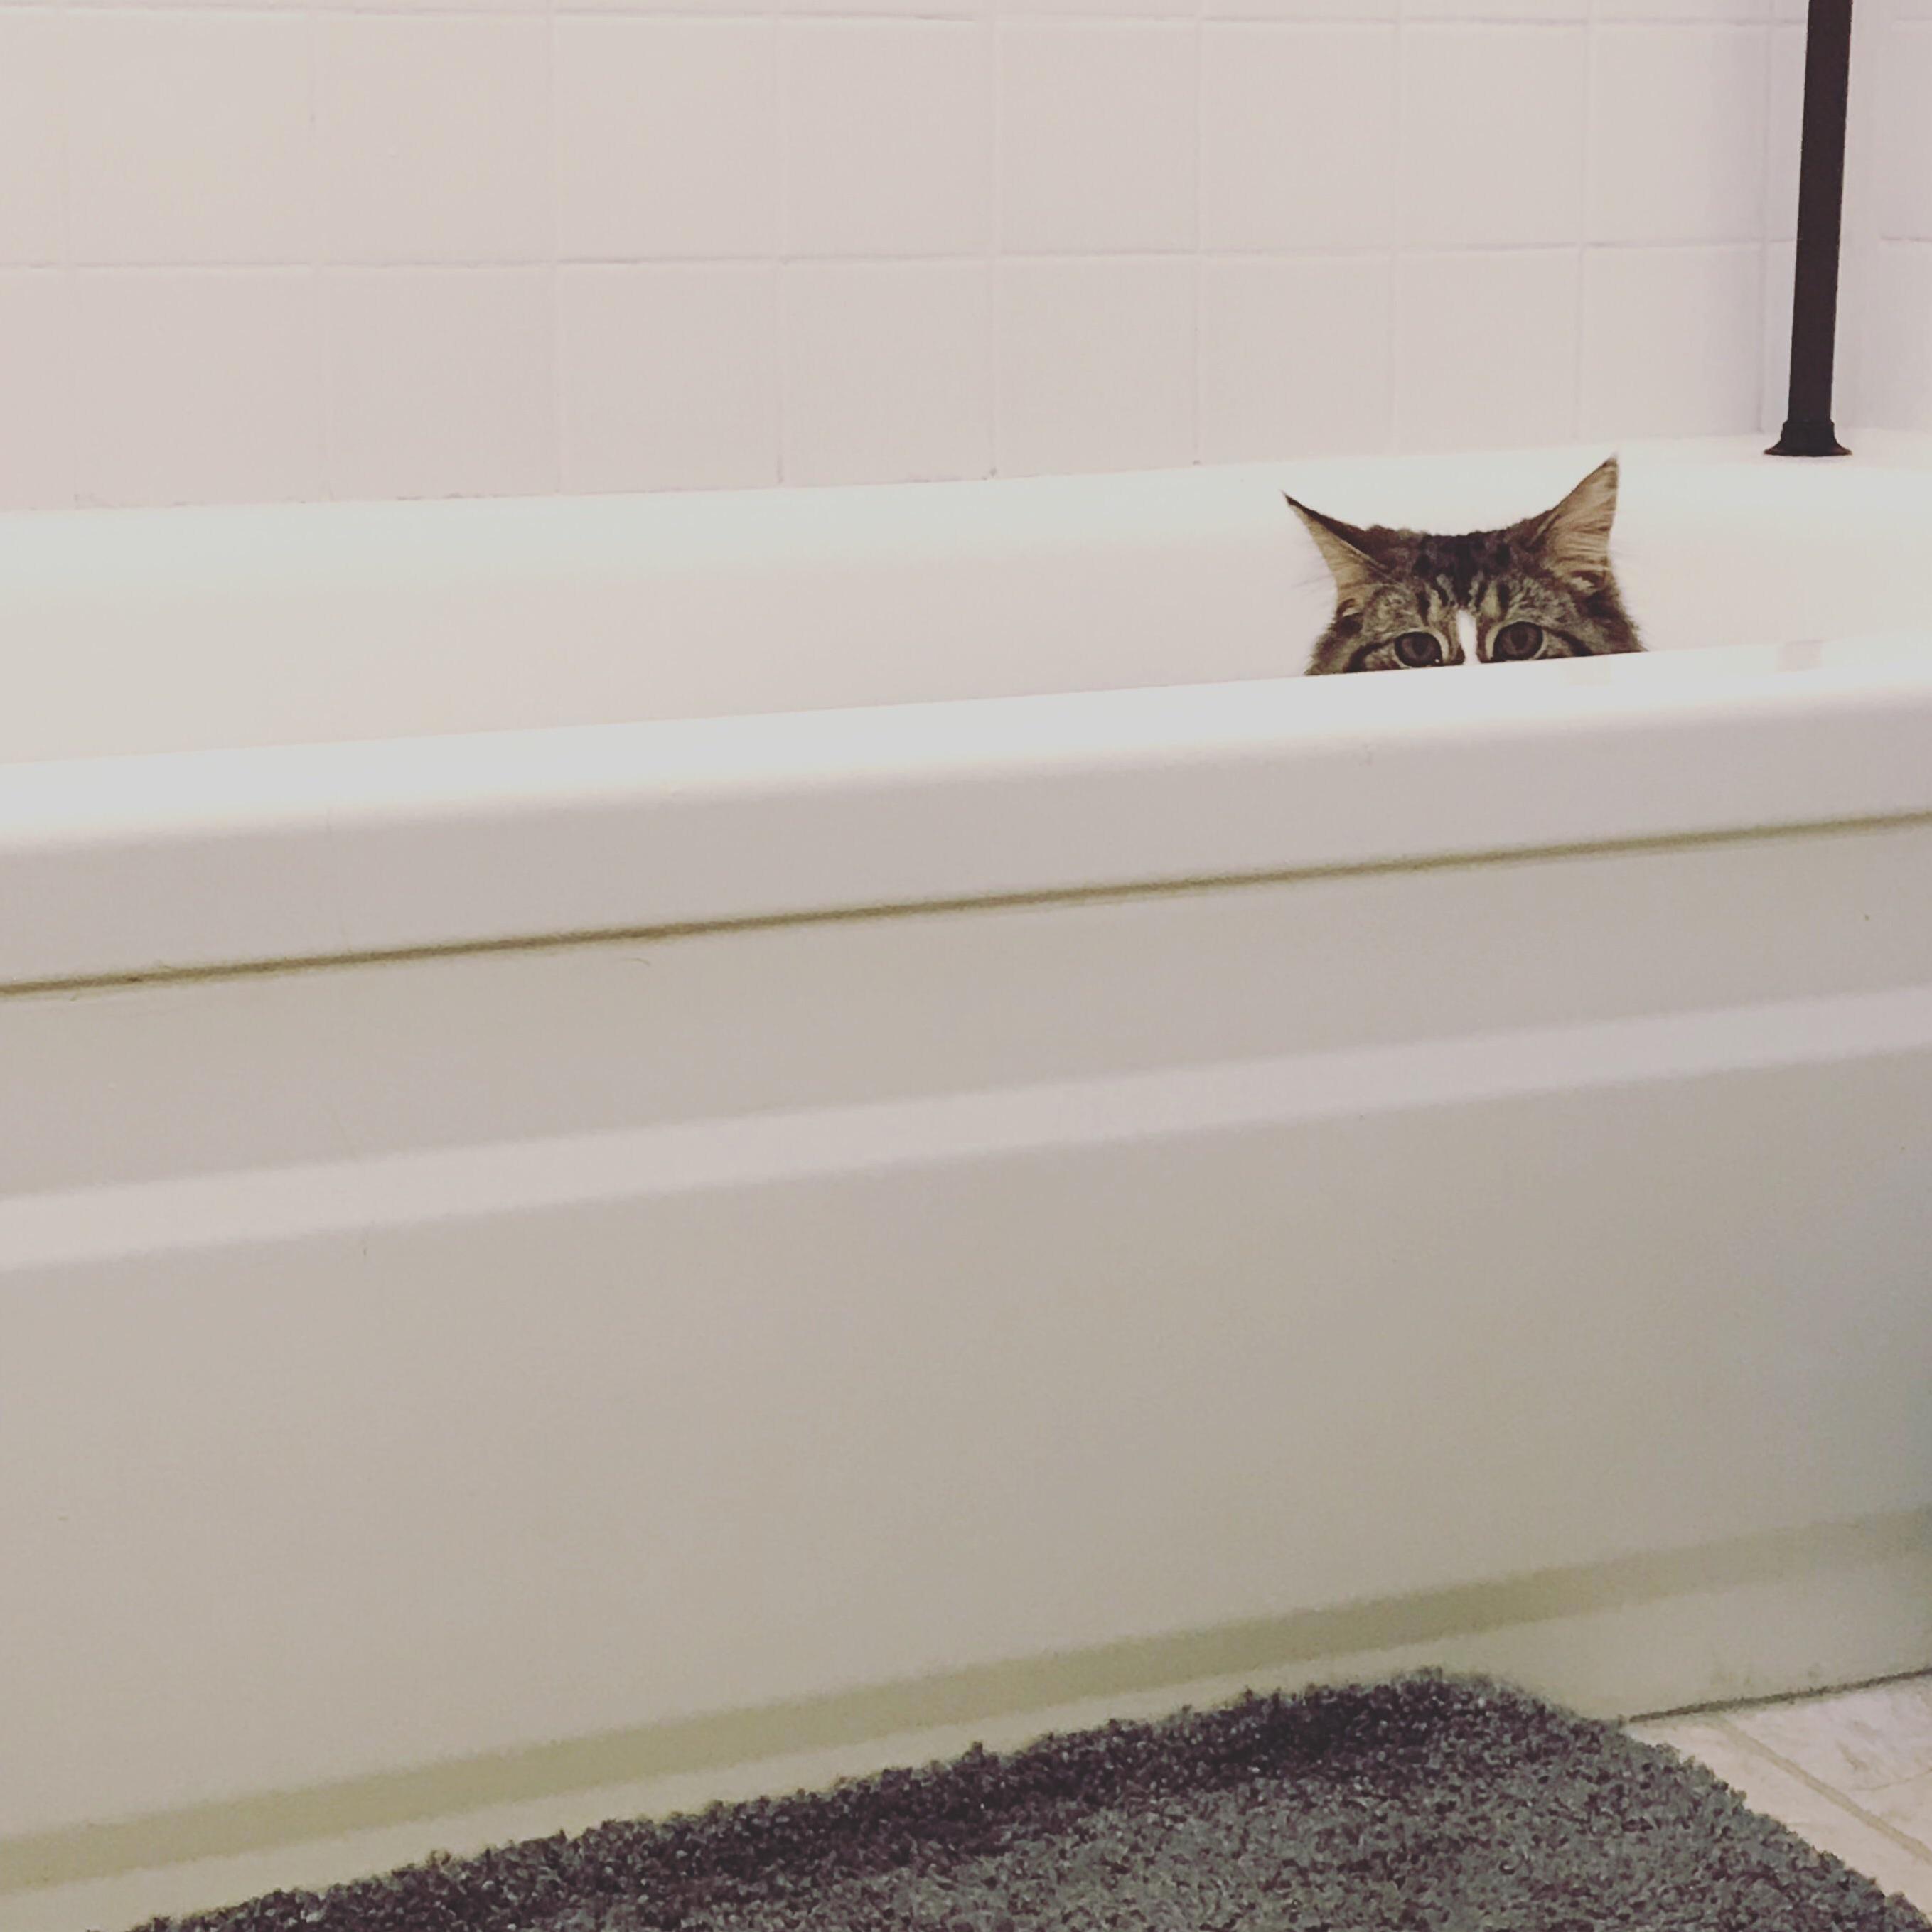 He always stares at me from the bath tub after ive taken a bath.